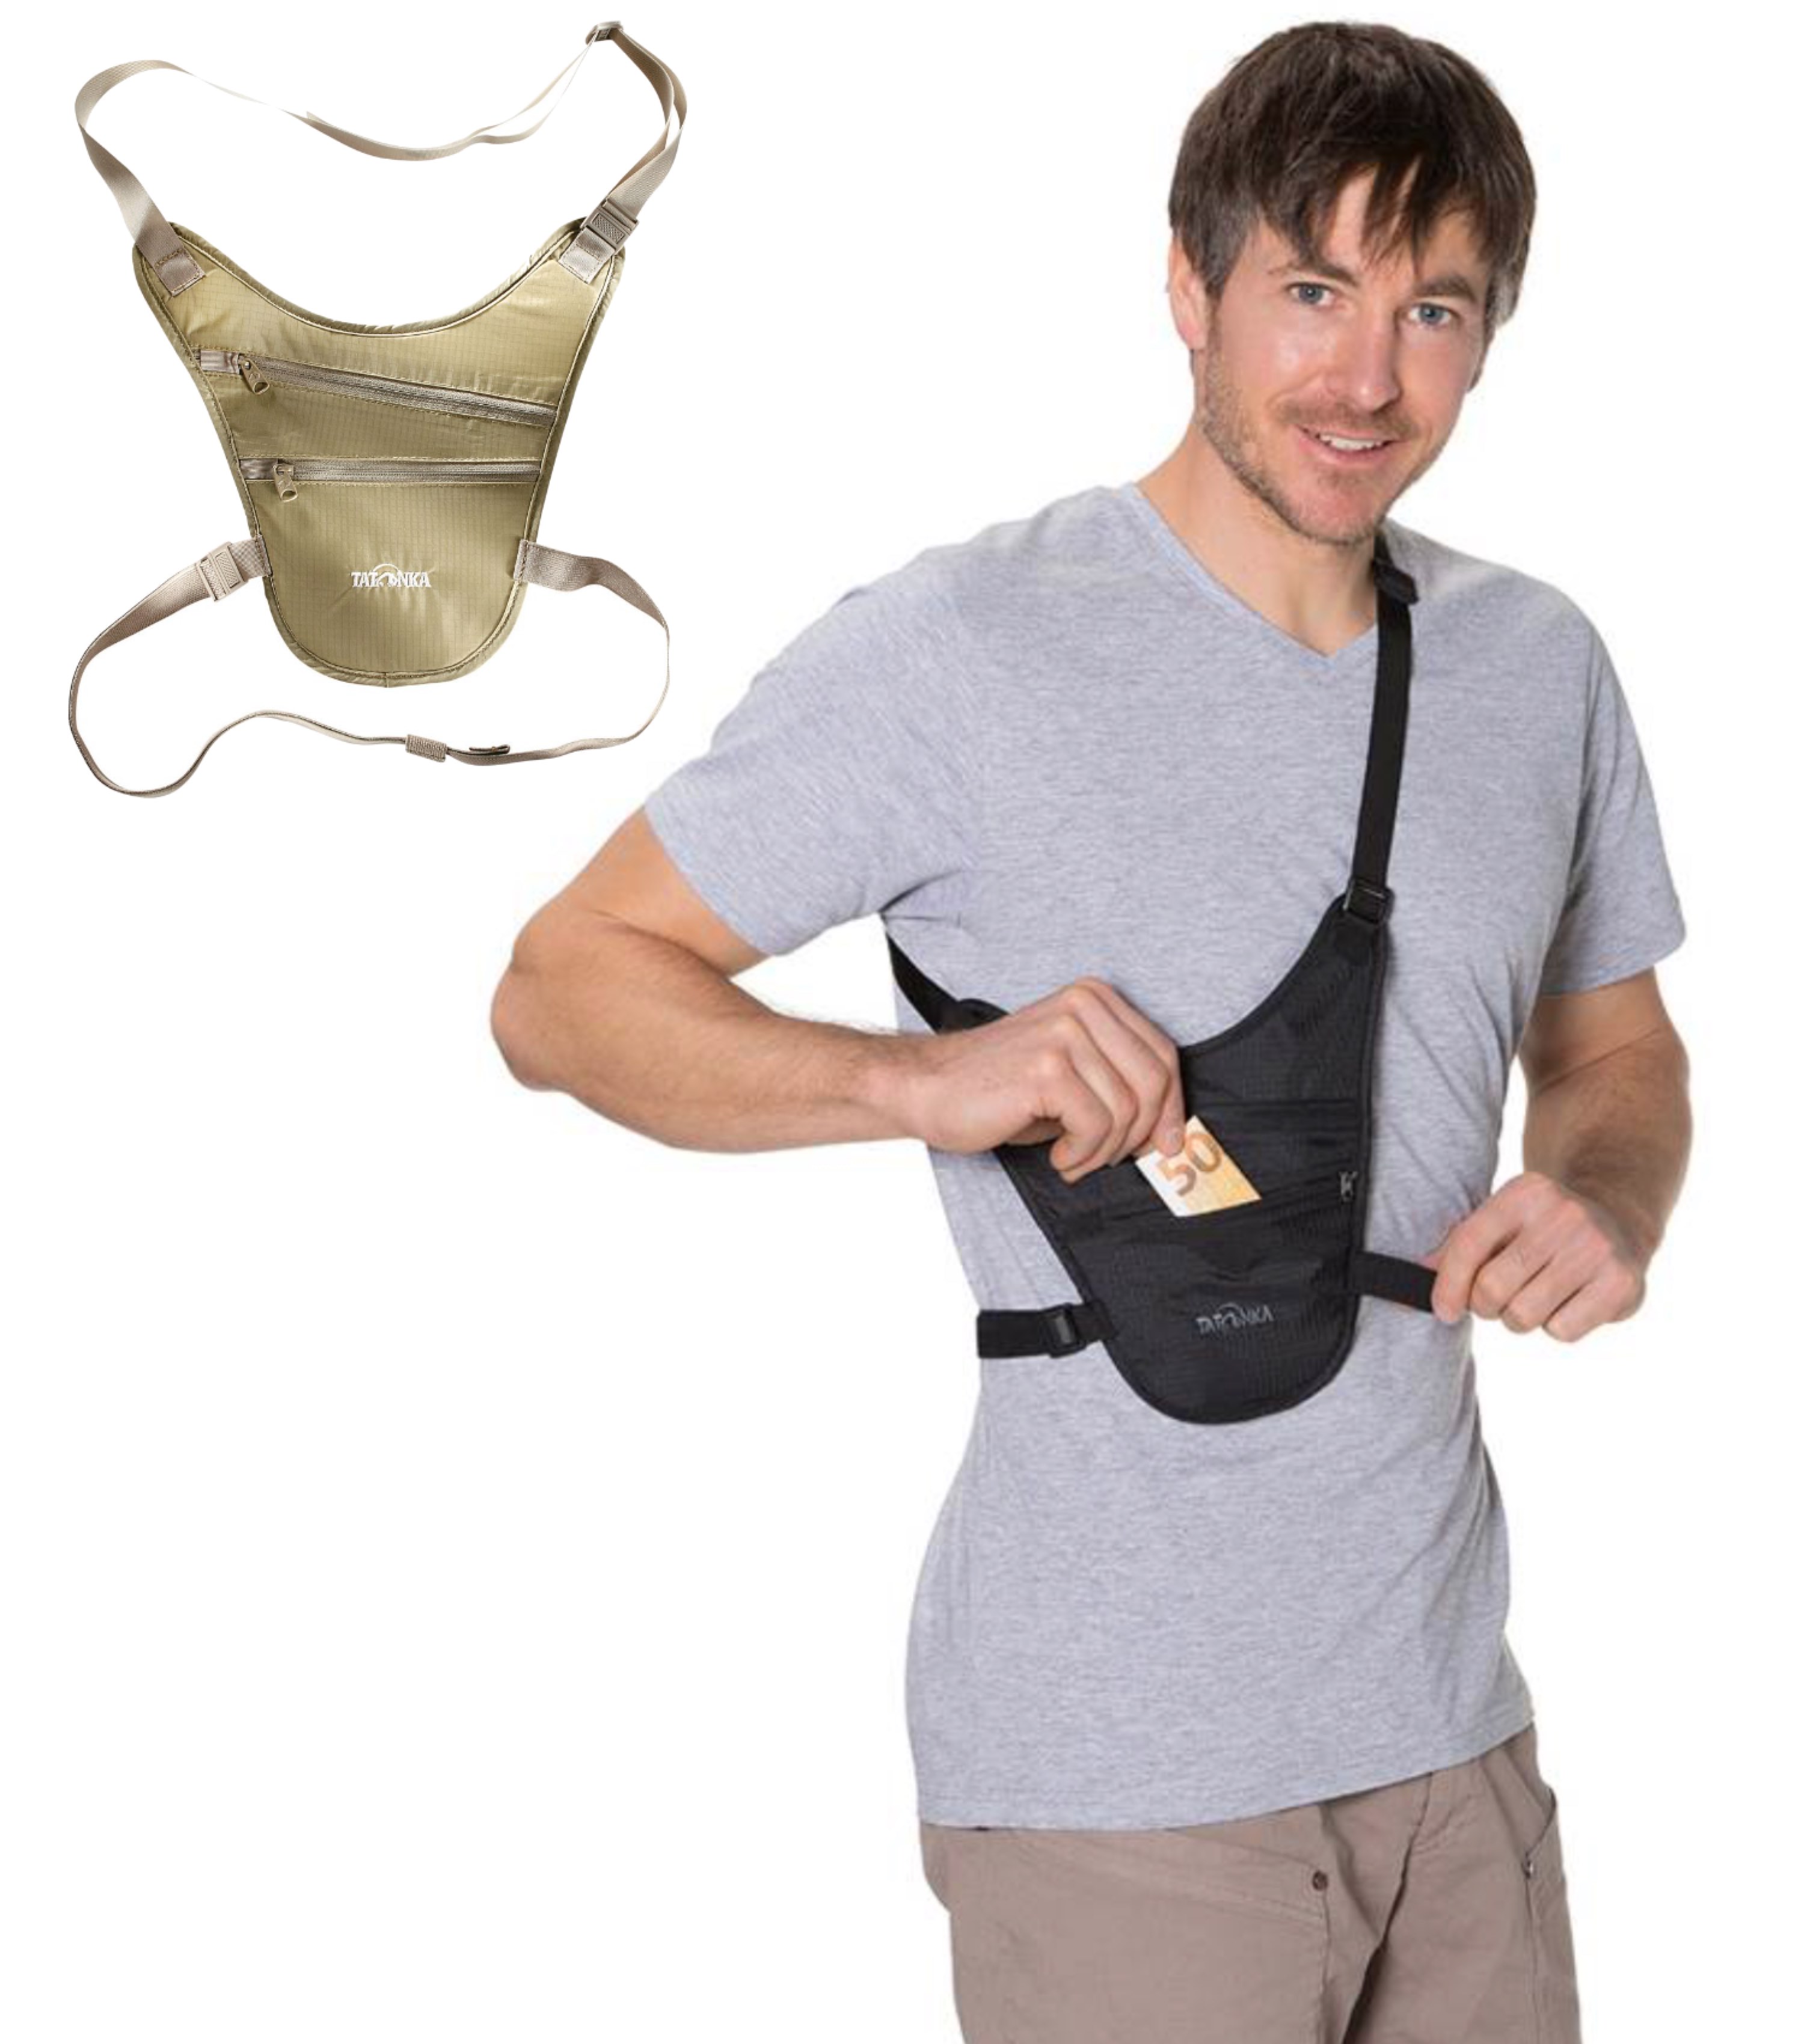 http://www.traveluniverse.com.au/Shared/Images/Product/Tatonka-Security-Pouch-Wallet-Chest-Holster-Style/TAT2859.040-group.jpg